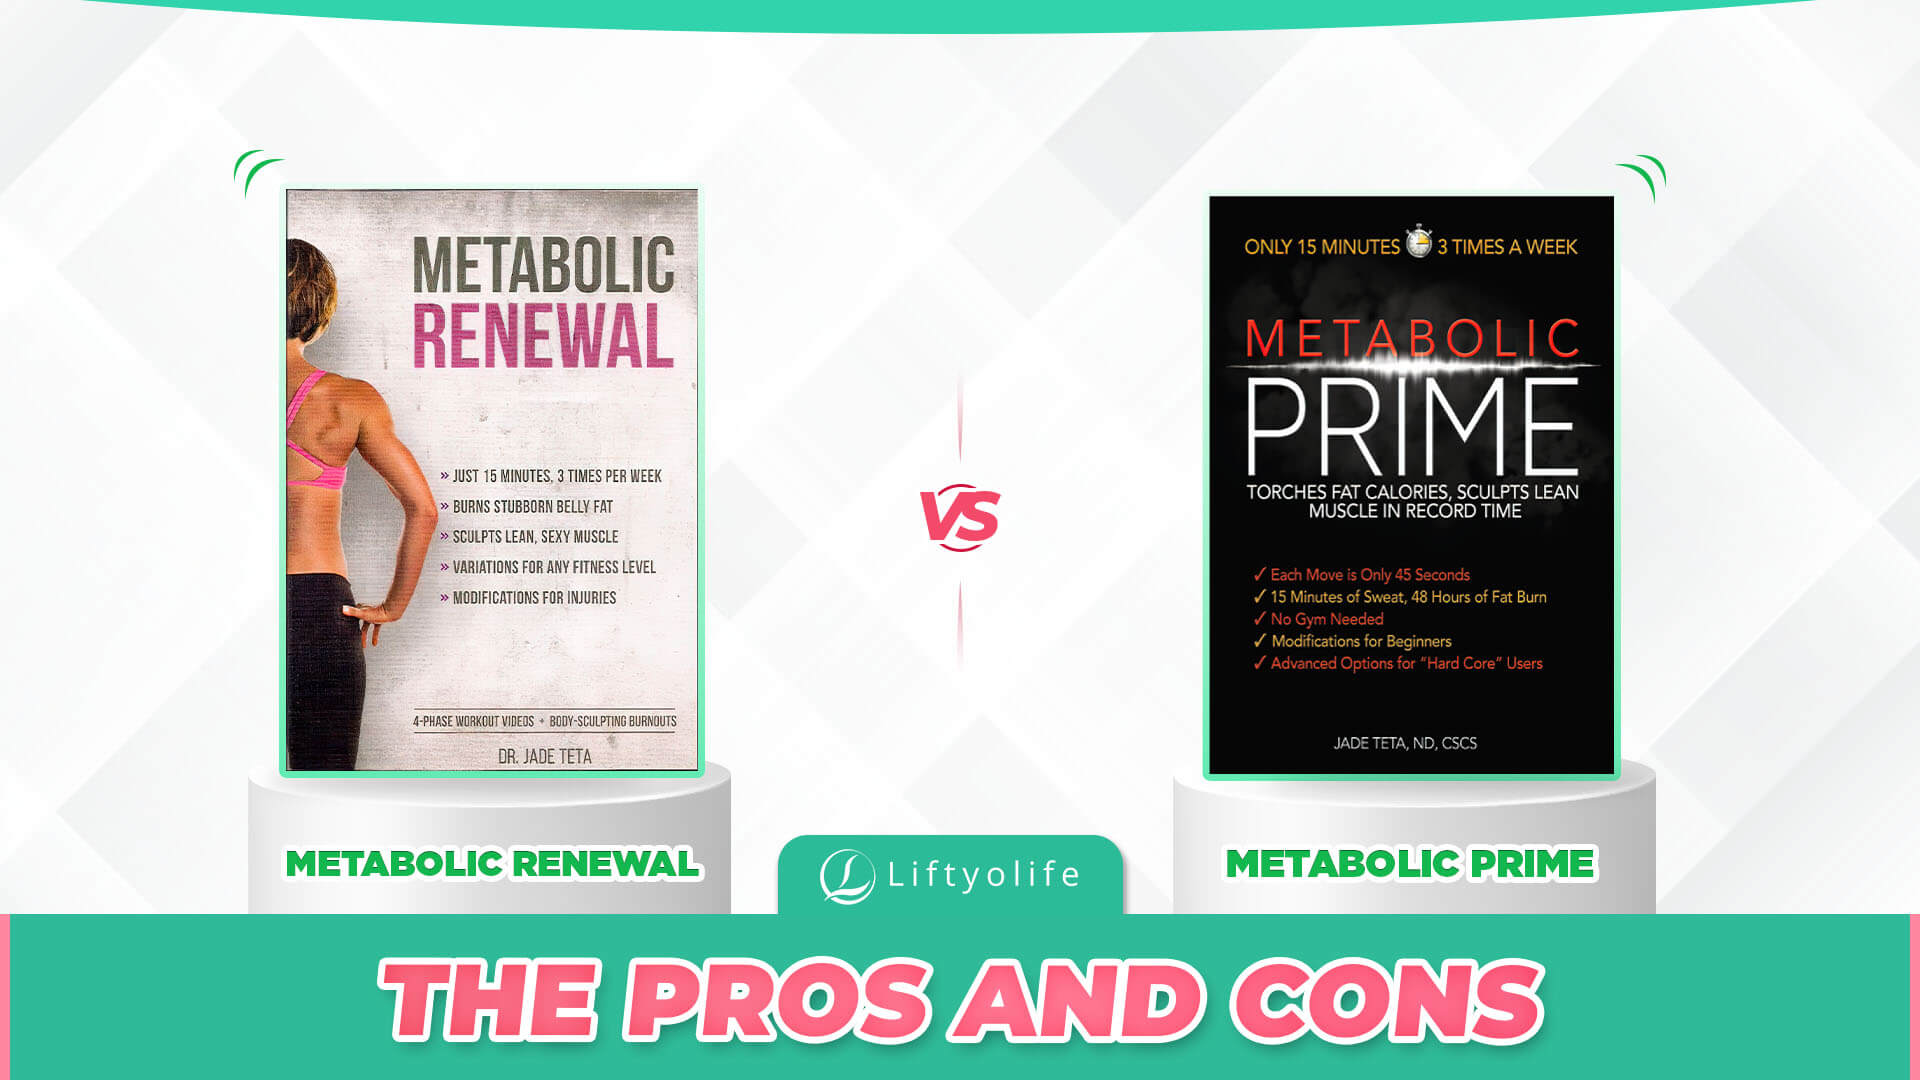 Metabolic Renewal vs Metabolic Prime: The Pros And Cons